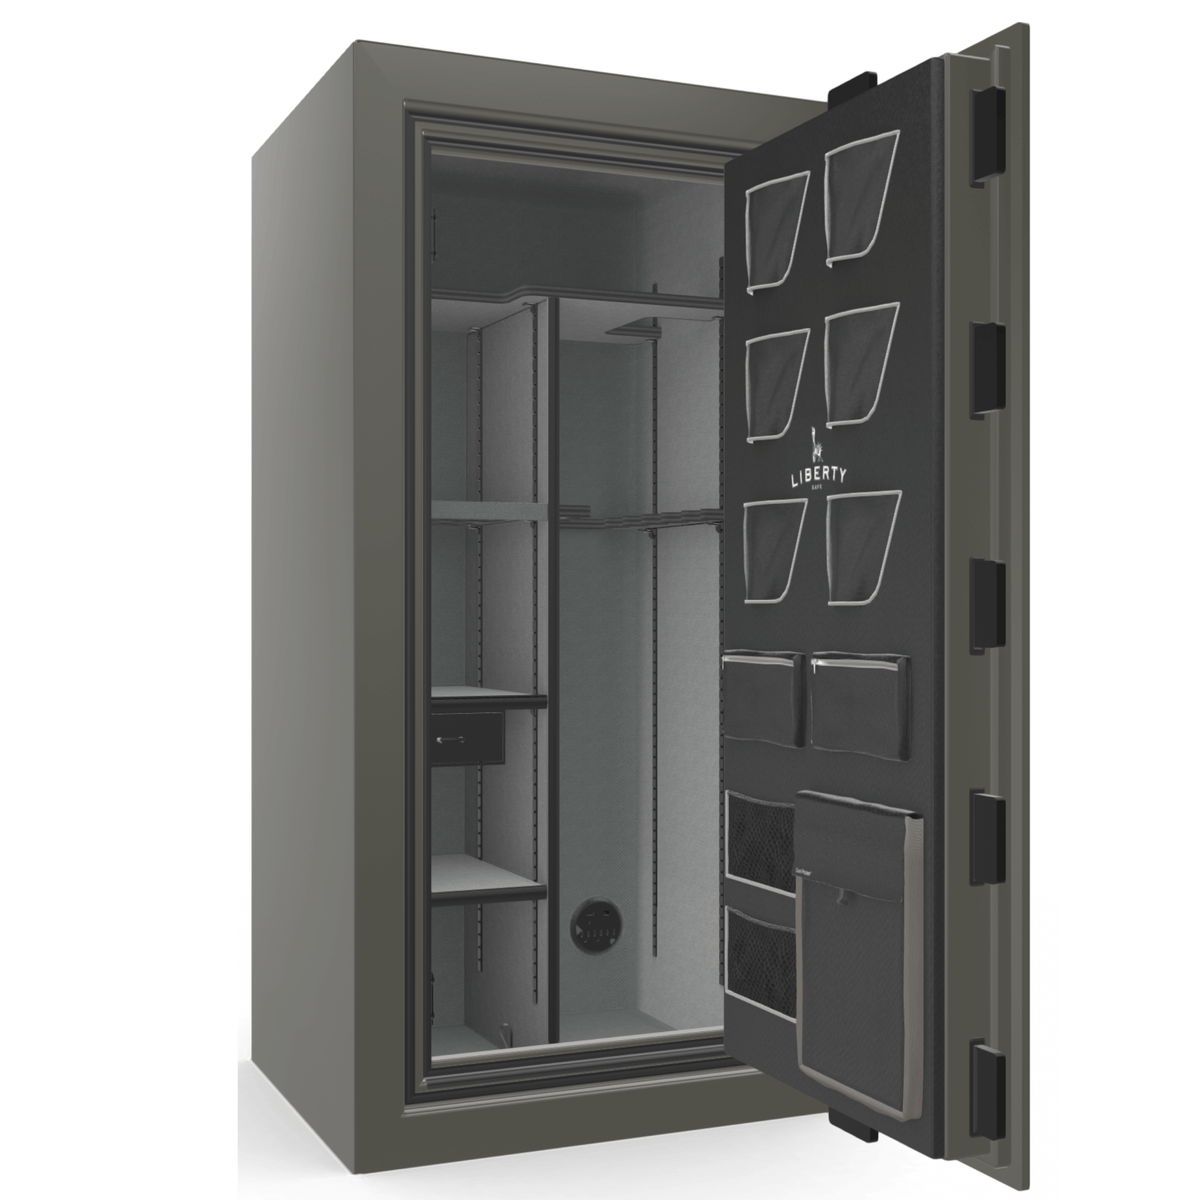 Liberty Safe Classic Plus 25 in Feathered Gray Gloss, open door.